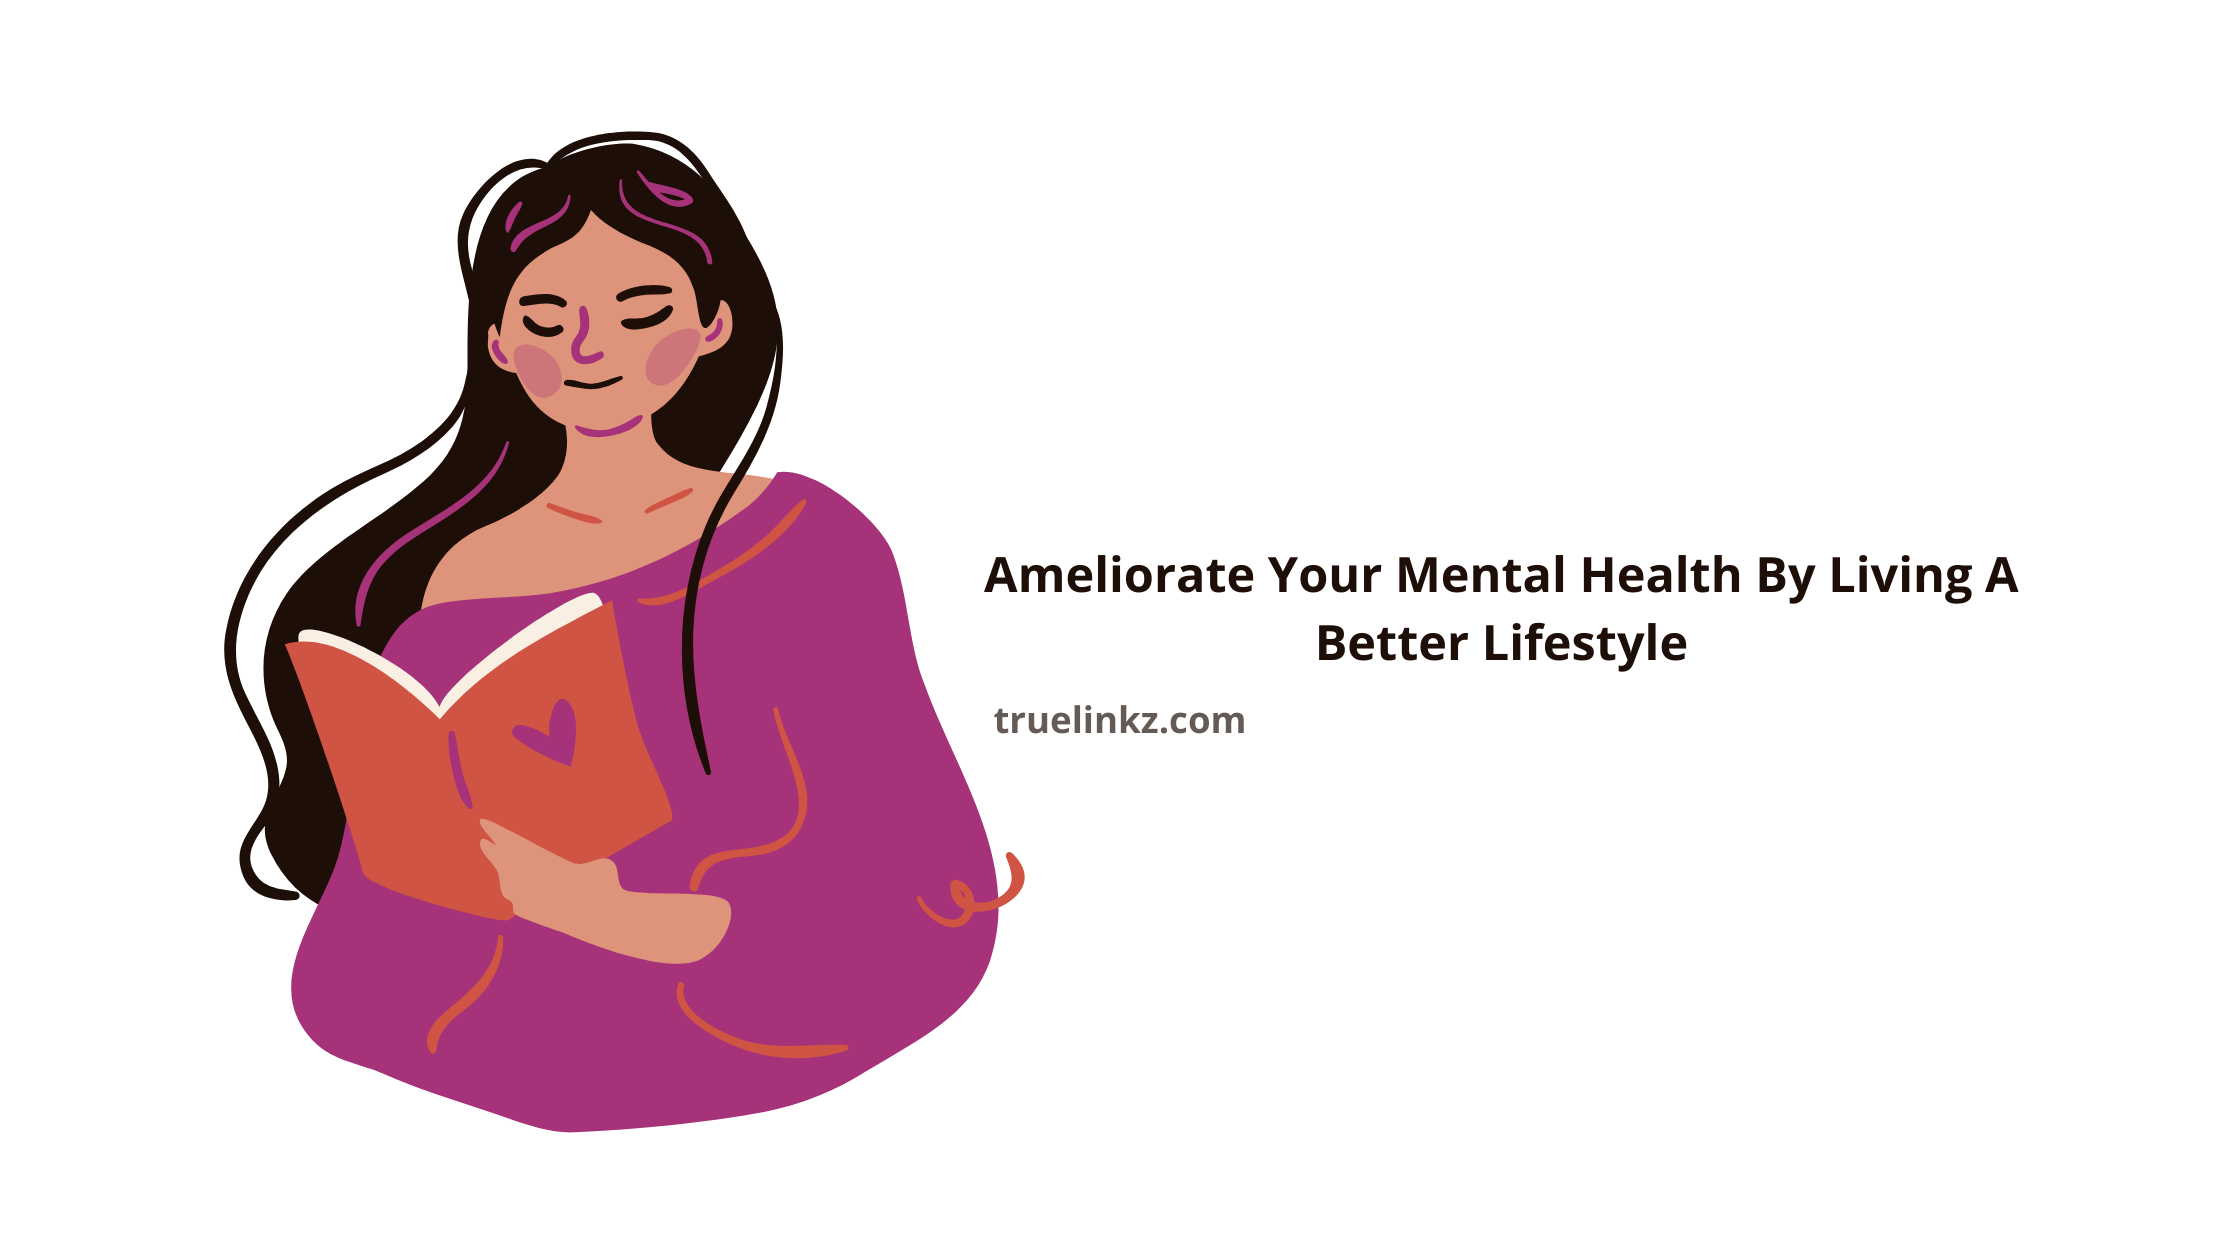 Ameliorate Your Mental Health By Living A Better Lifestyle